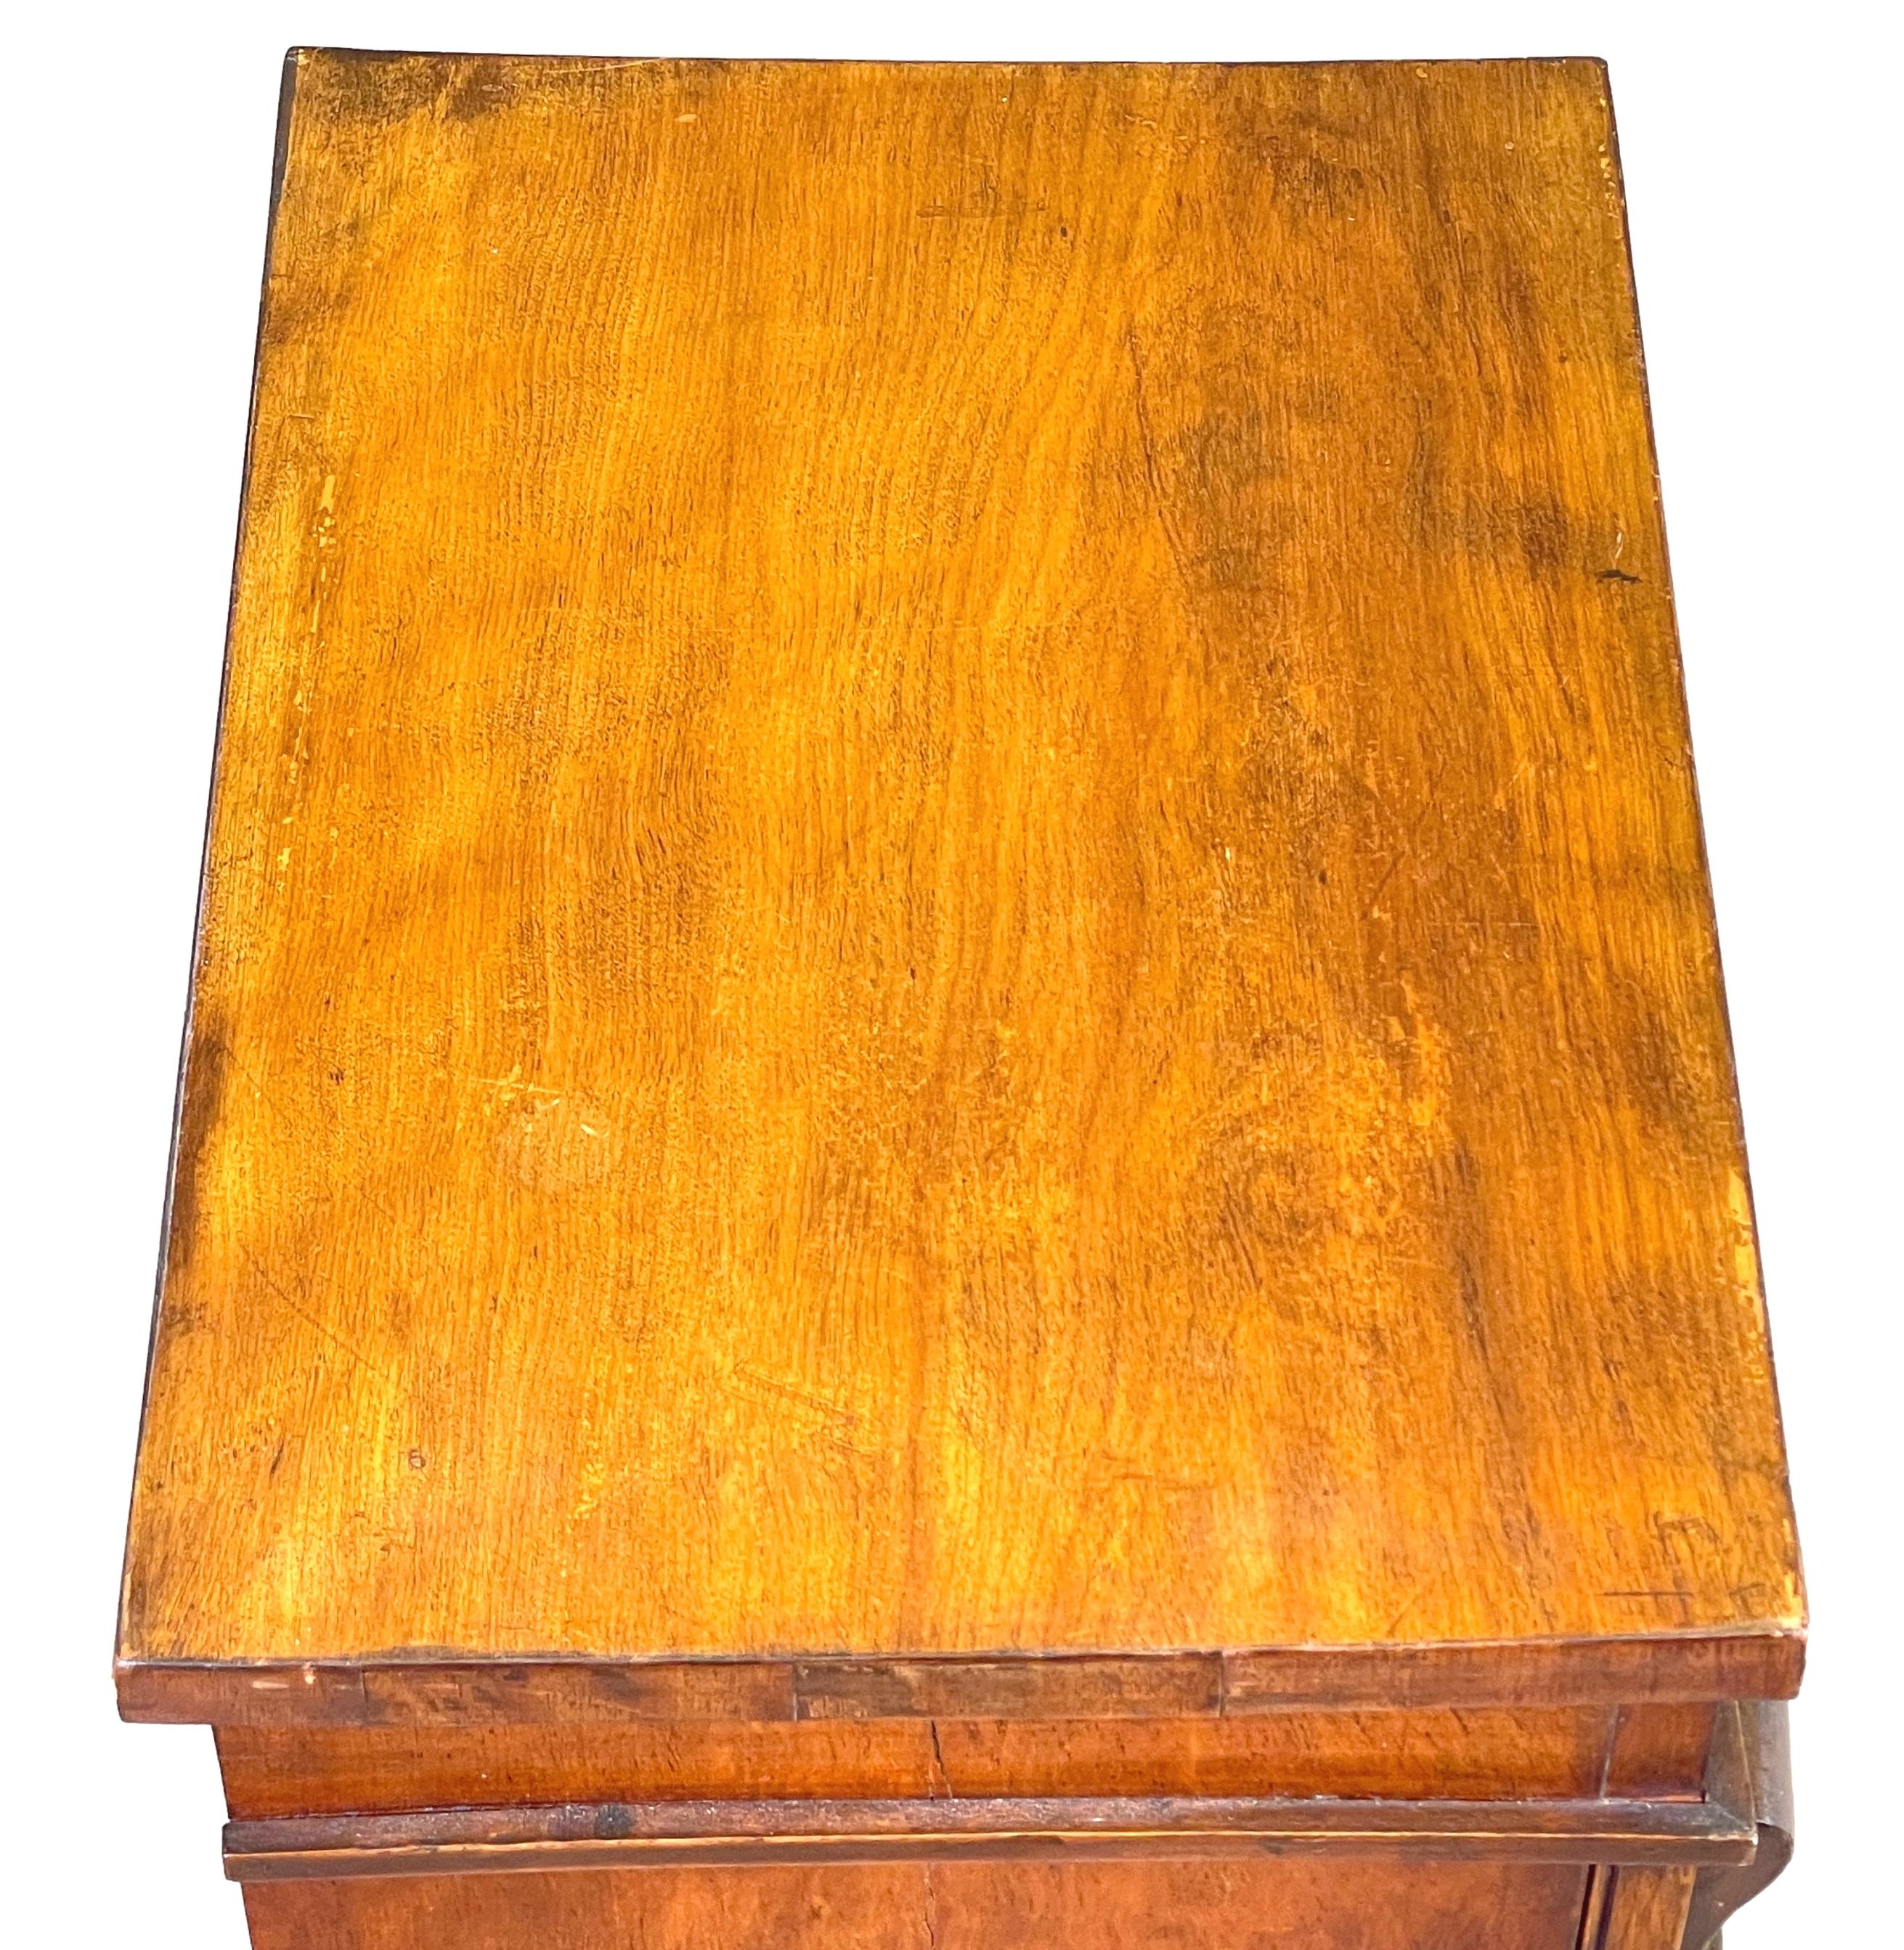 A very good quality mid 19th century Satinbirch wood, childs size wellington chest, having eight drawers with original turned wooden knobs, enclosed by Locking Pilaster.

Childs size examples of the typical wellington chest of drawers are